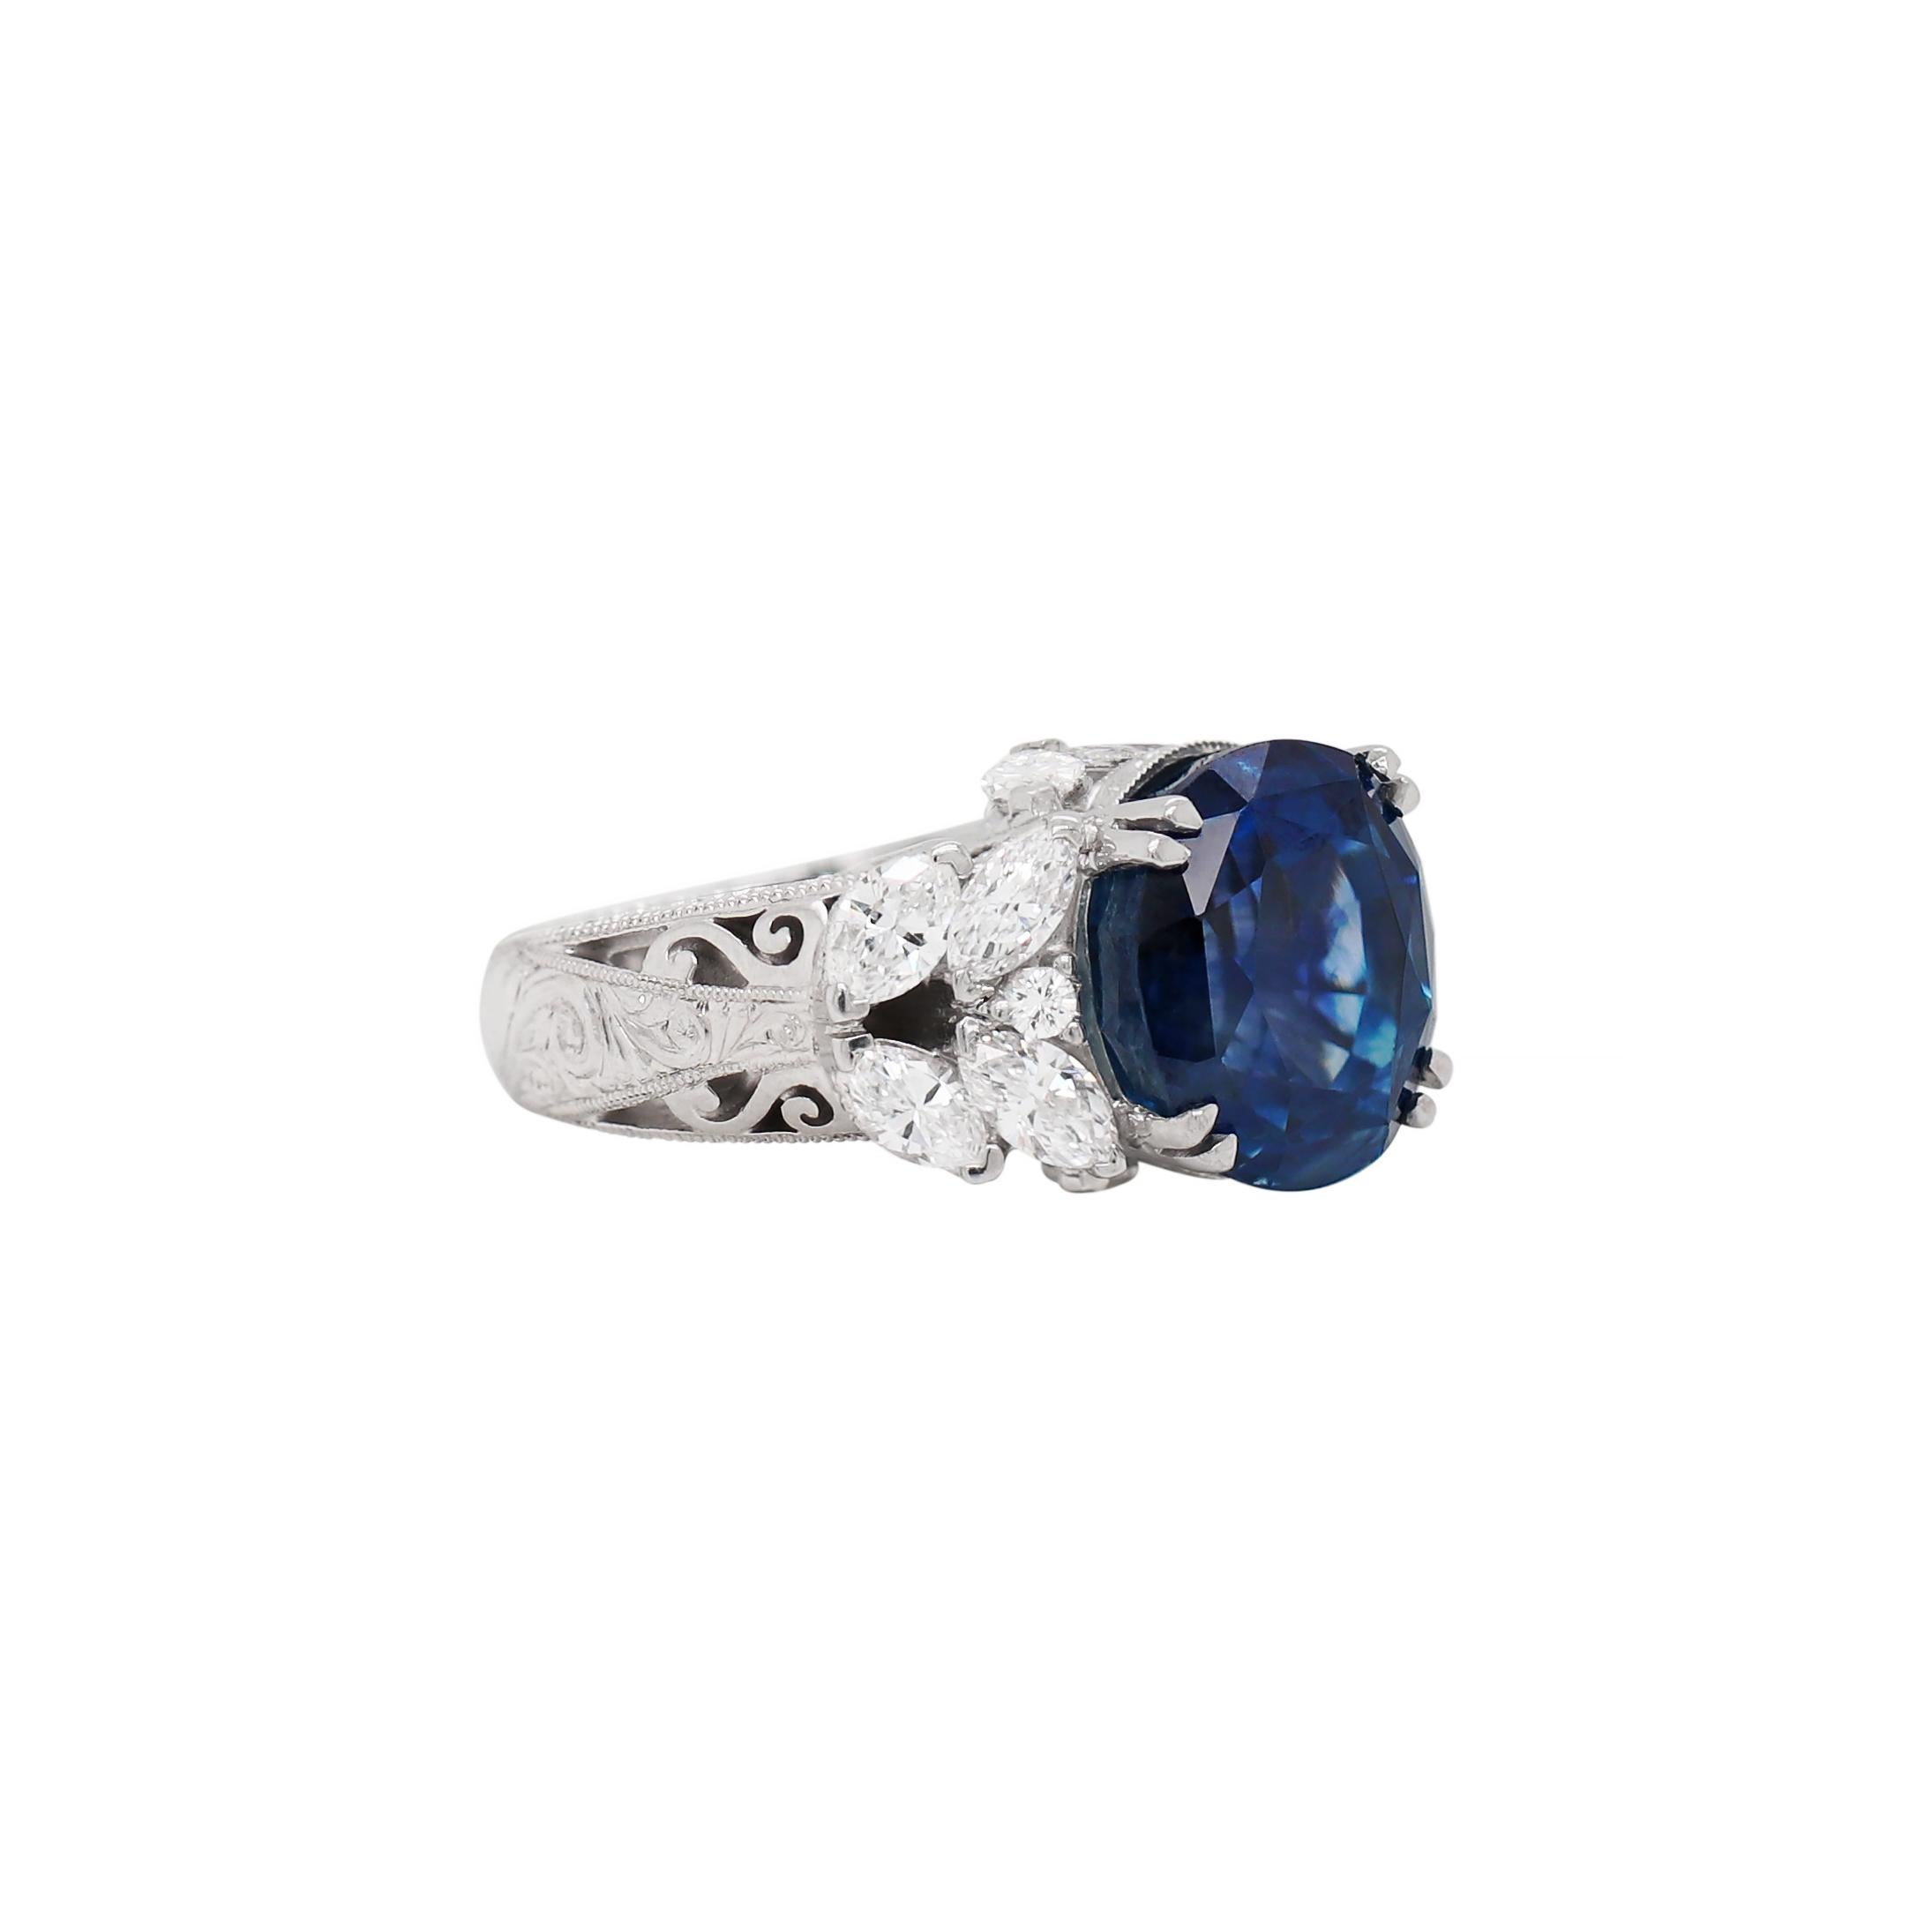 A one of a kind statement ring featuring a beautiful oval cut blue sapphire weighing an impressive 11.92ct in a four double claw open back setting. The stone is mounted in the centre of an intricate open-work designed ring set with 12 fine quality